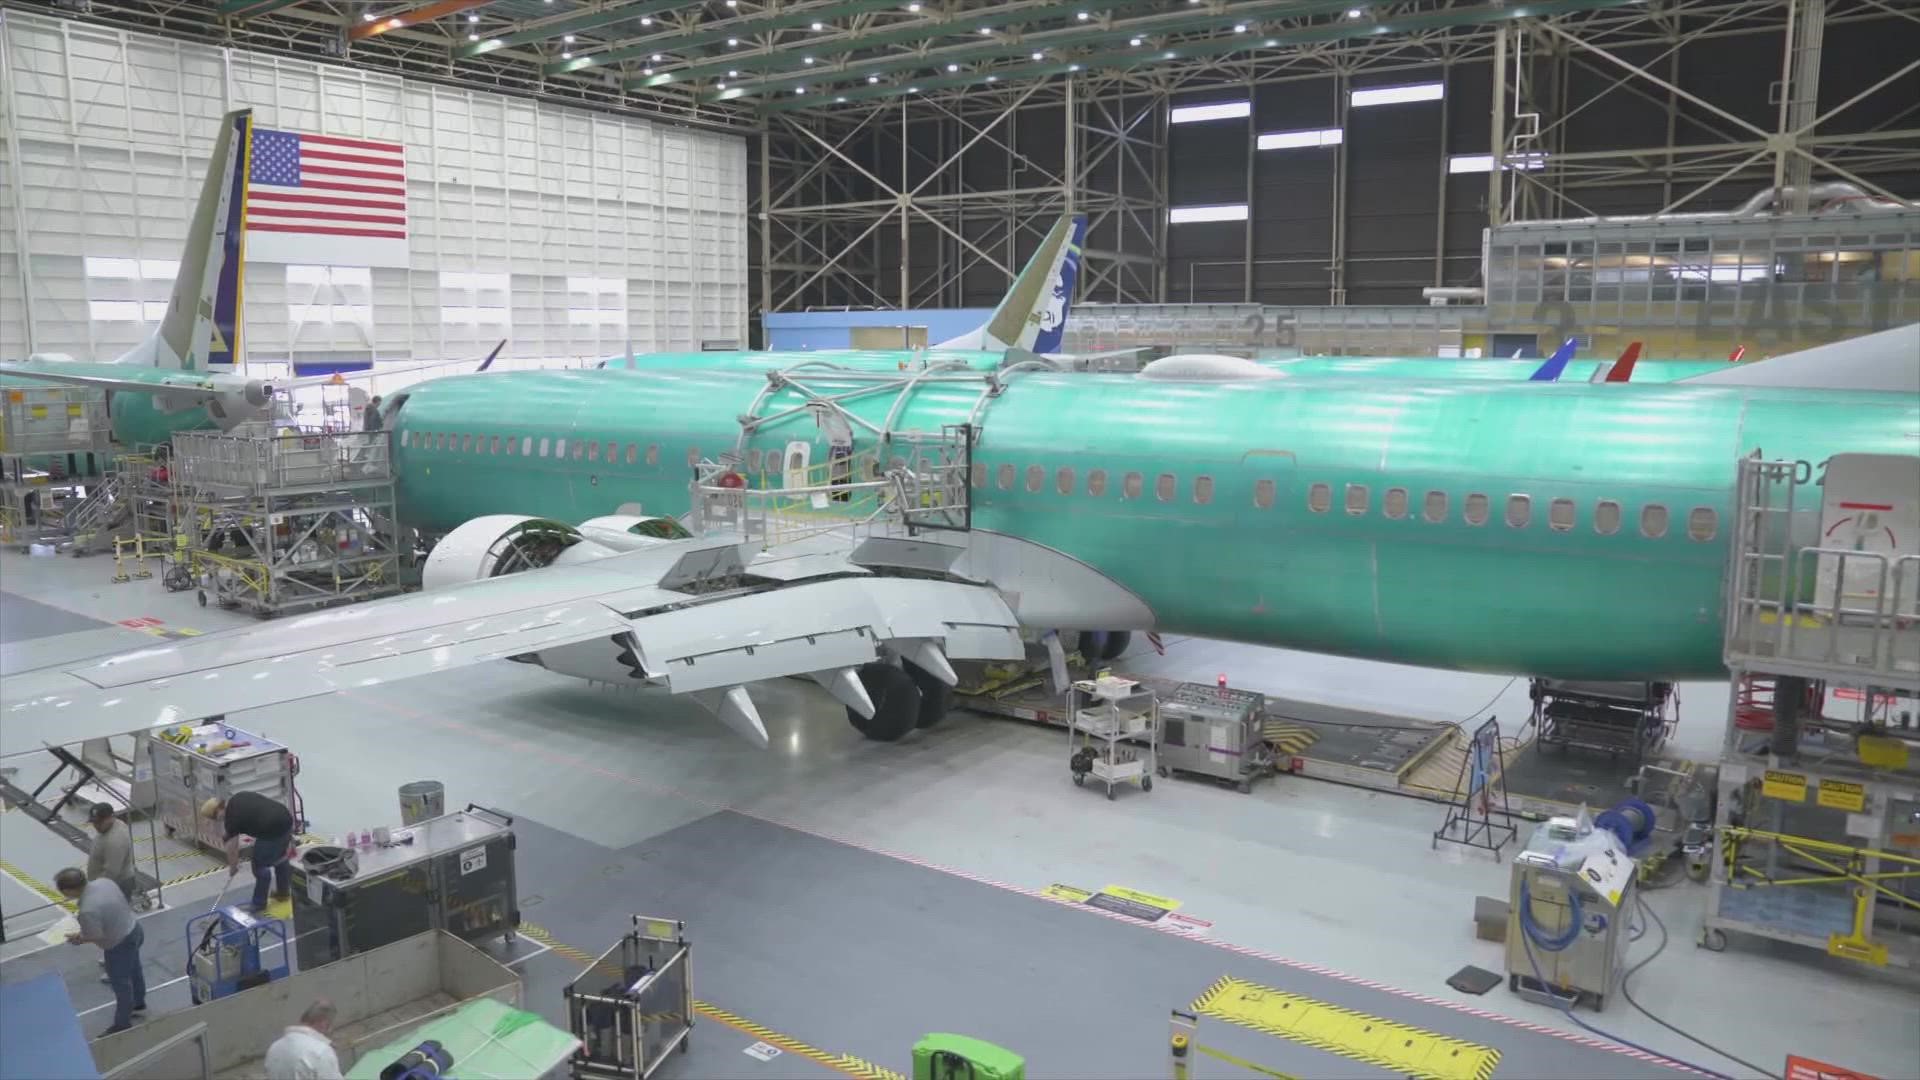 Boeing has thousands of job openings now that production is back online, and that has a trickle-down effect on many in our region.